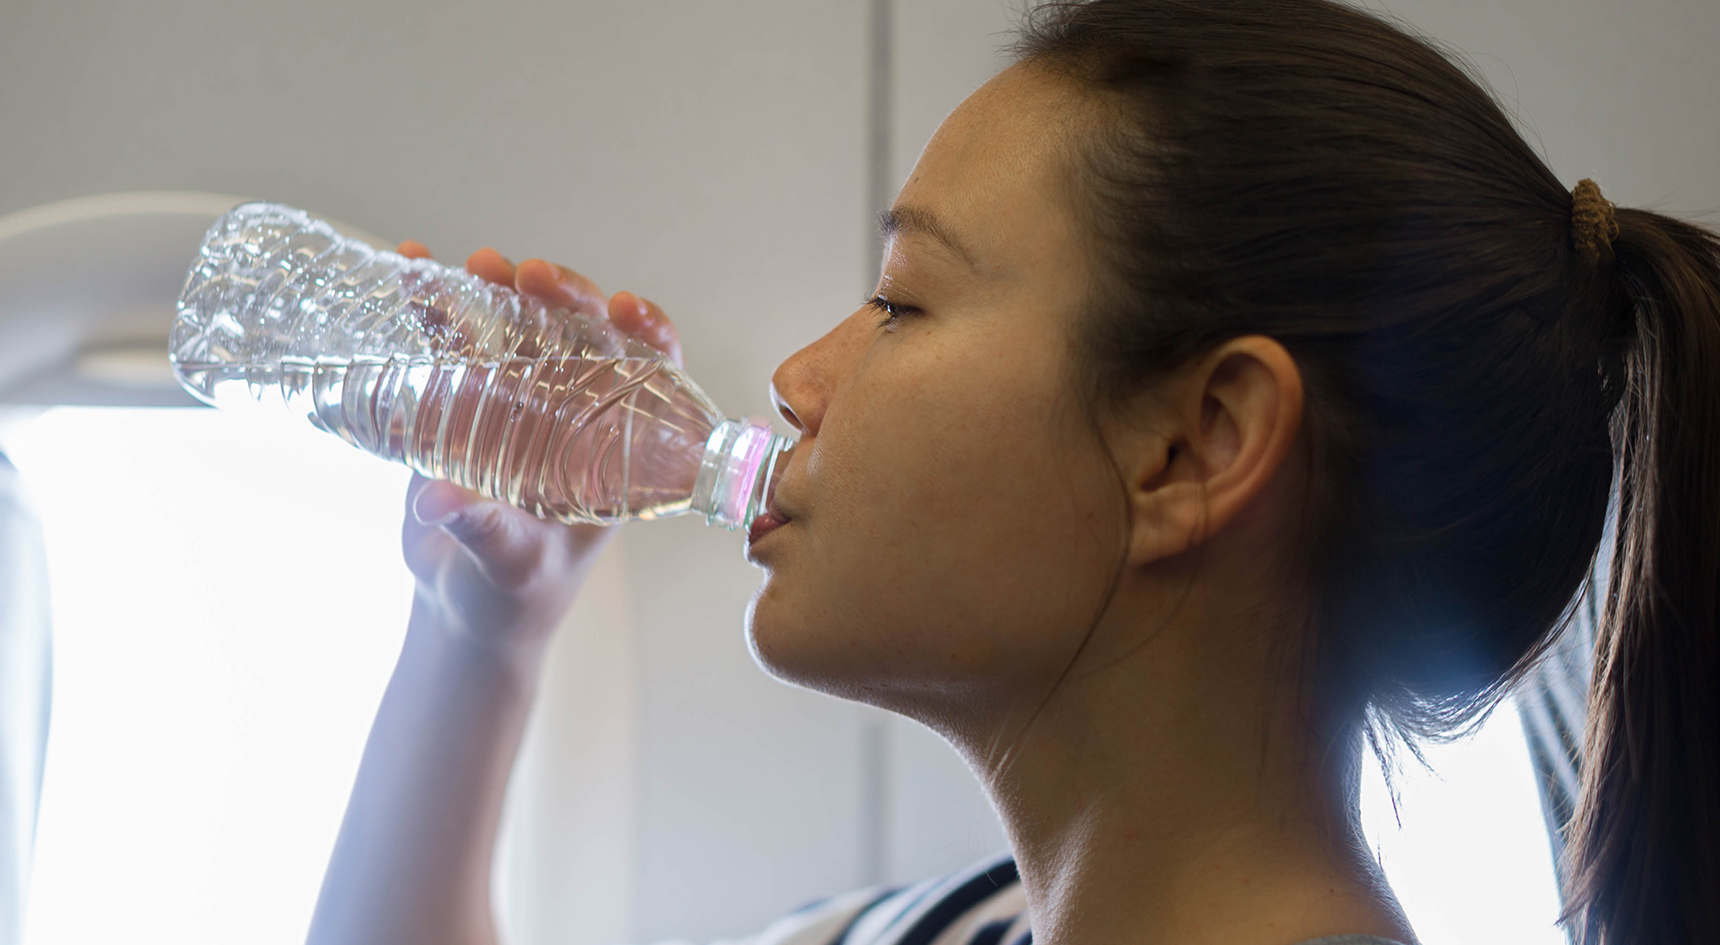 Female passenger drinking water on a plane